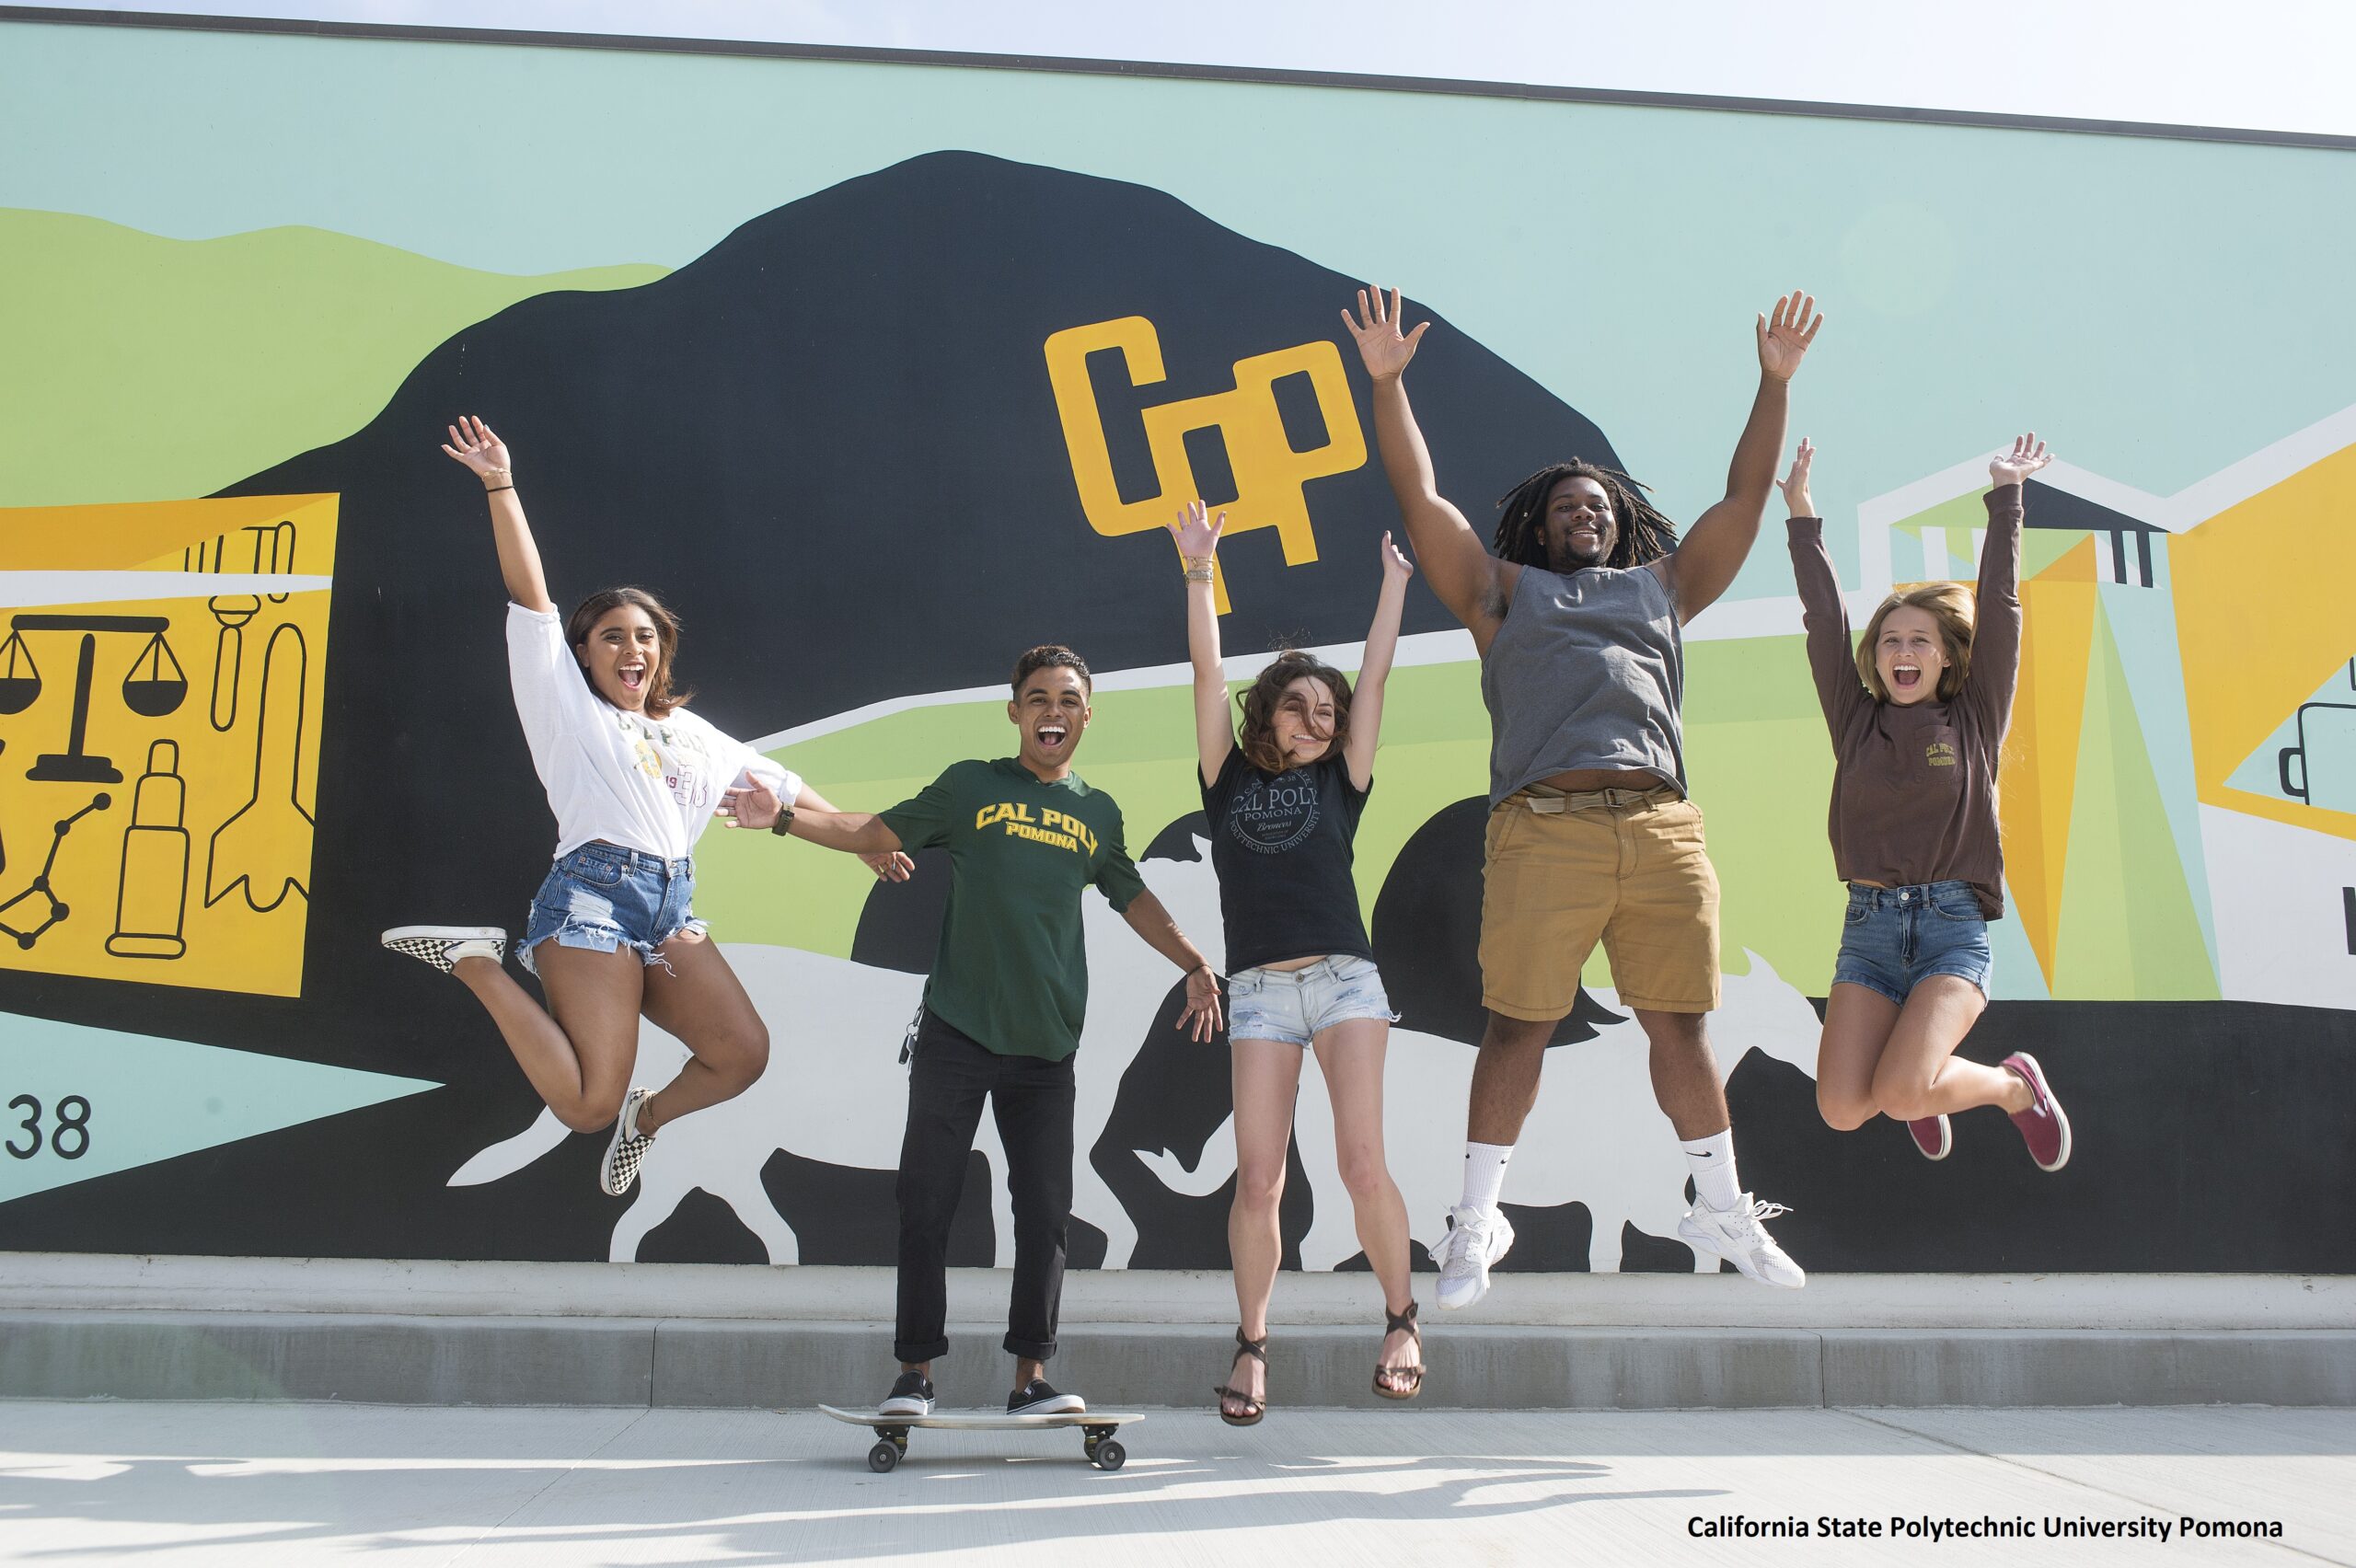 Students and mural1-Cal Poly Pomona students and mural near the parking structure. August 23, 2017.